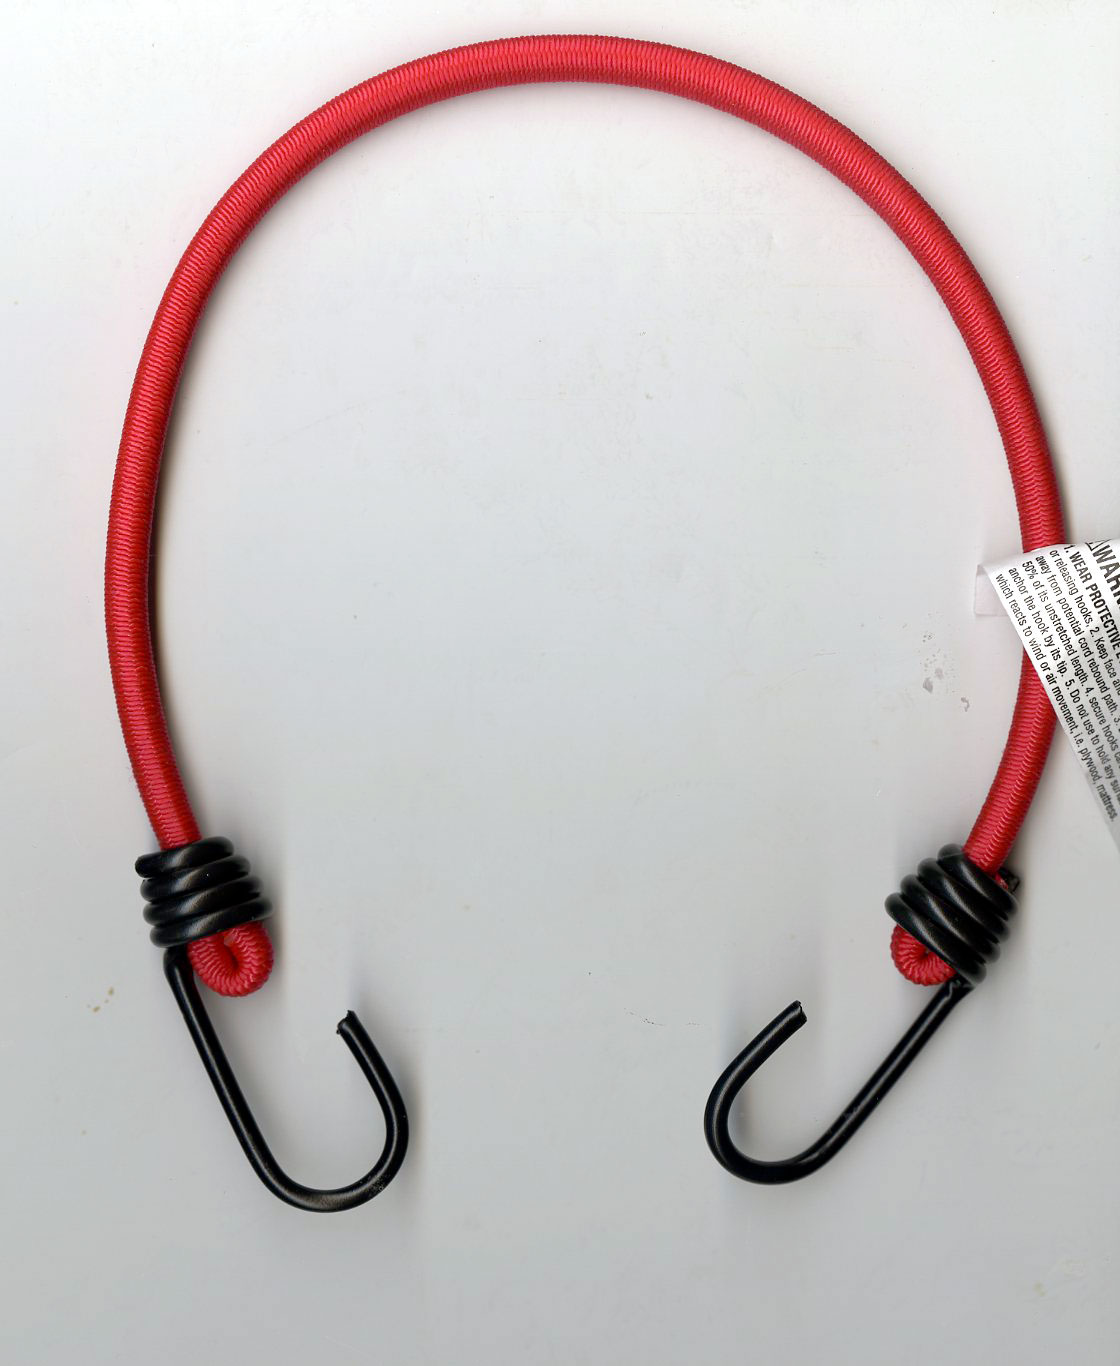 5/16 X 20 Red Bungee Cord Assembly with Black PVC Coated Hooks